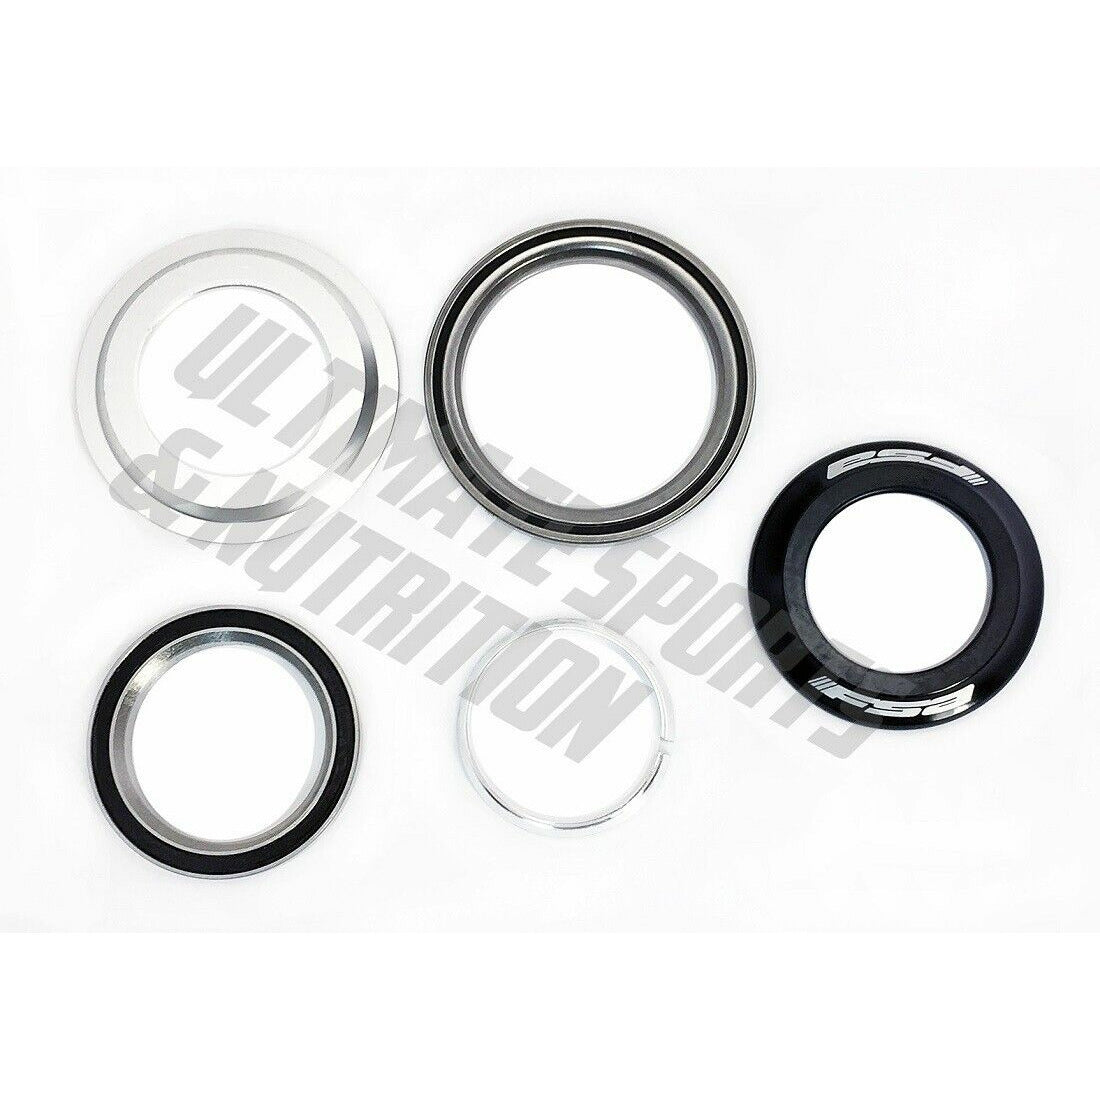 FSA Integrated IS Tapered Headset 1.5 1-1/8" Bearings with Reducer Crown Race